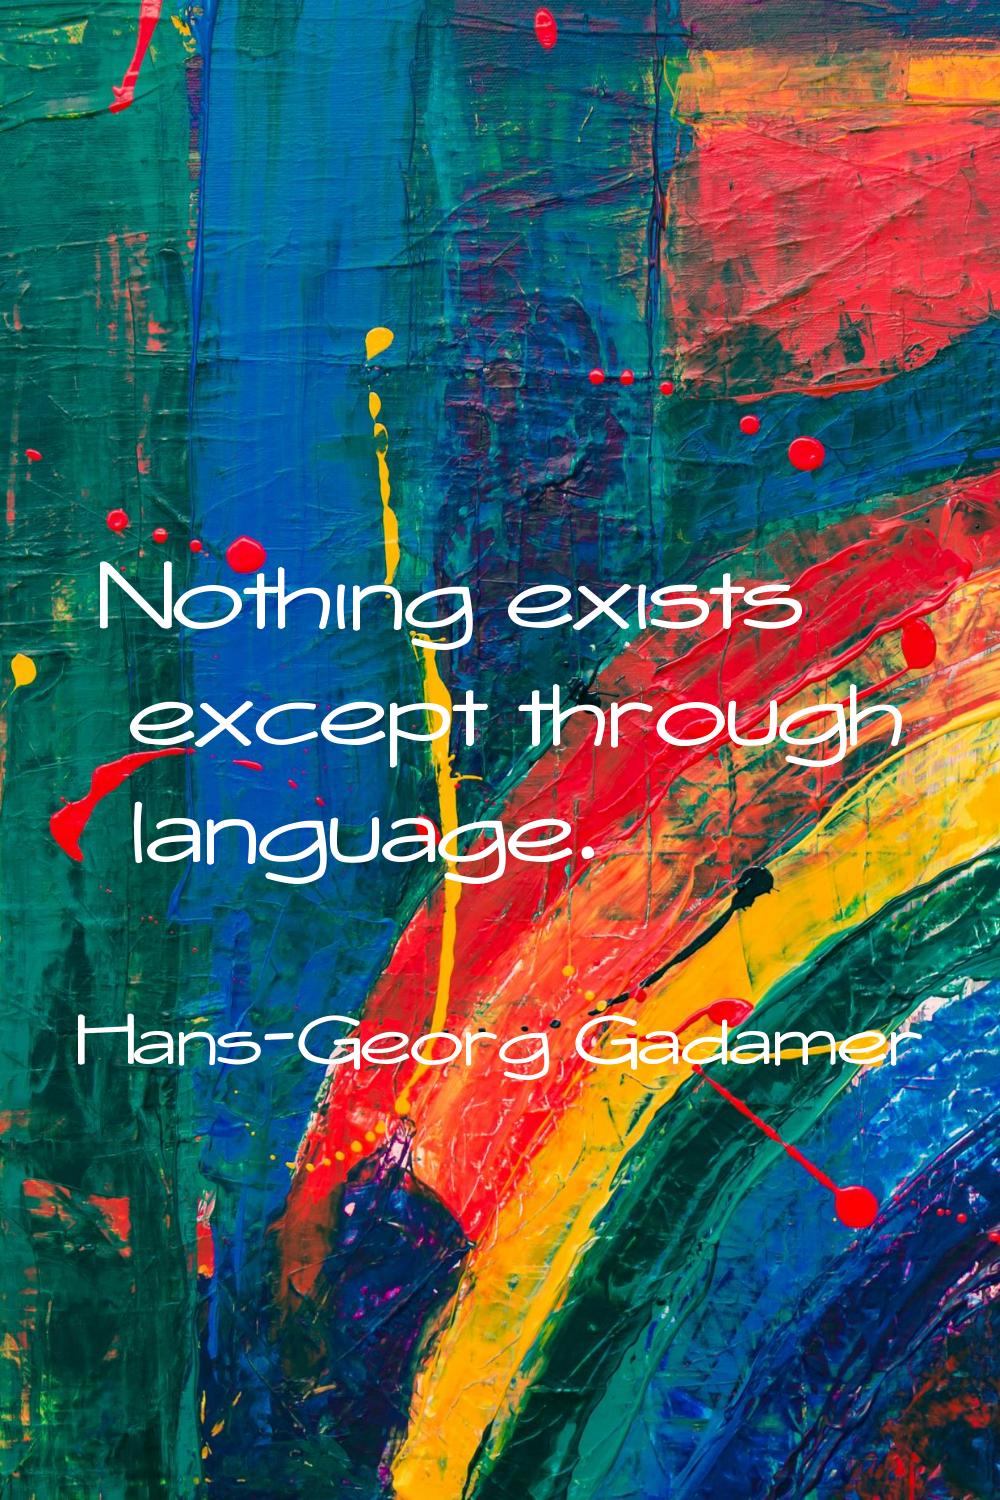 Nothing exists except through language.